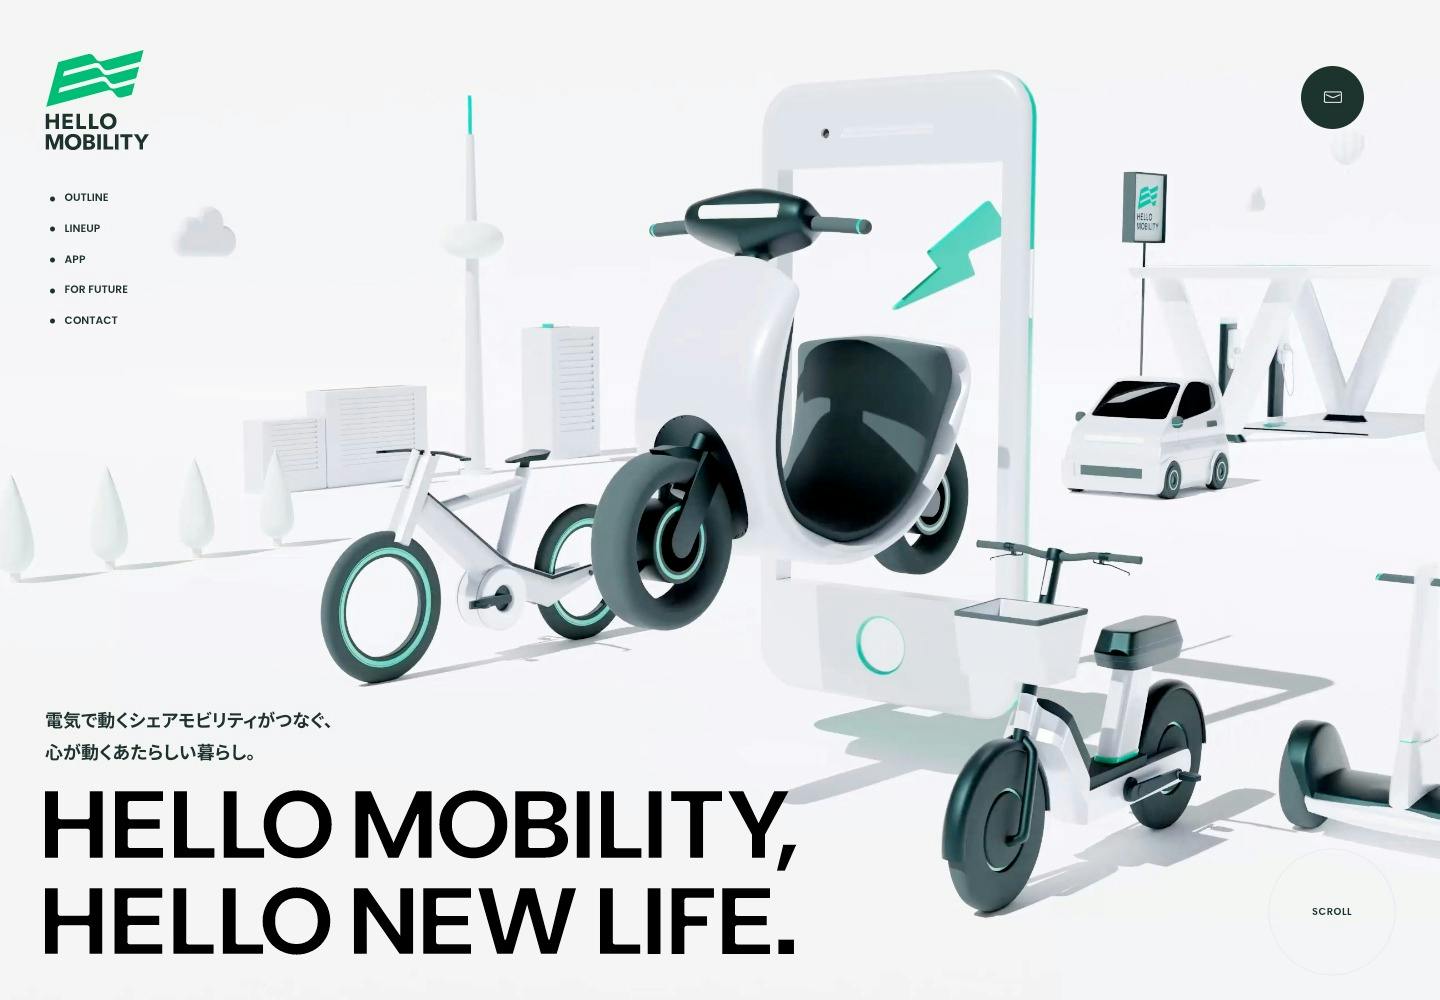 Cover Image for HELLO MOBILITY – 電気で動くシェアモビリティ